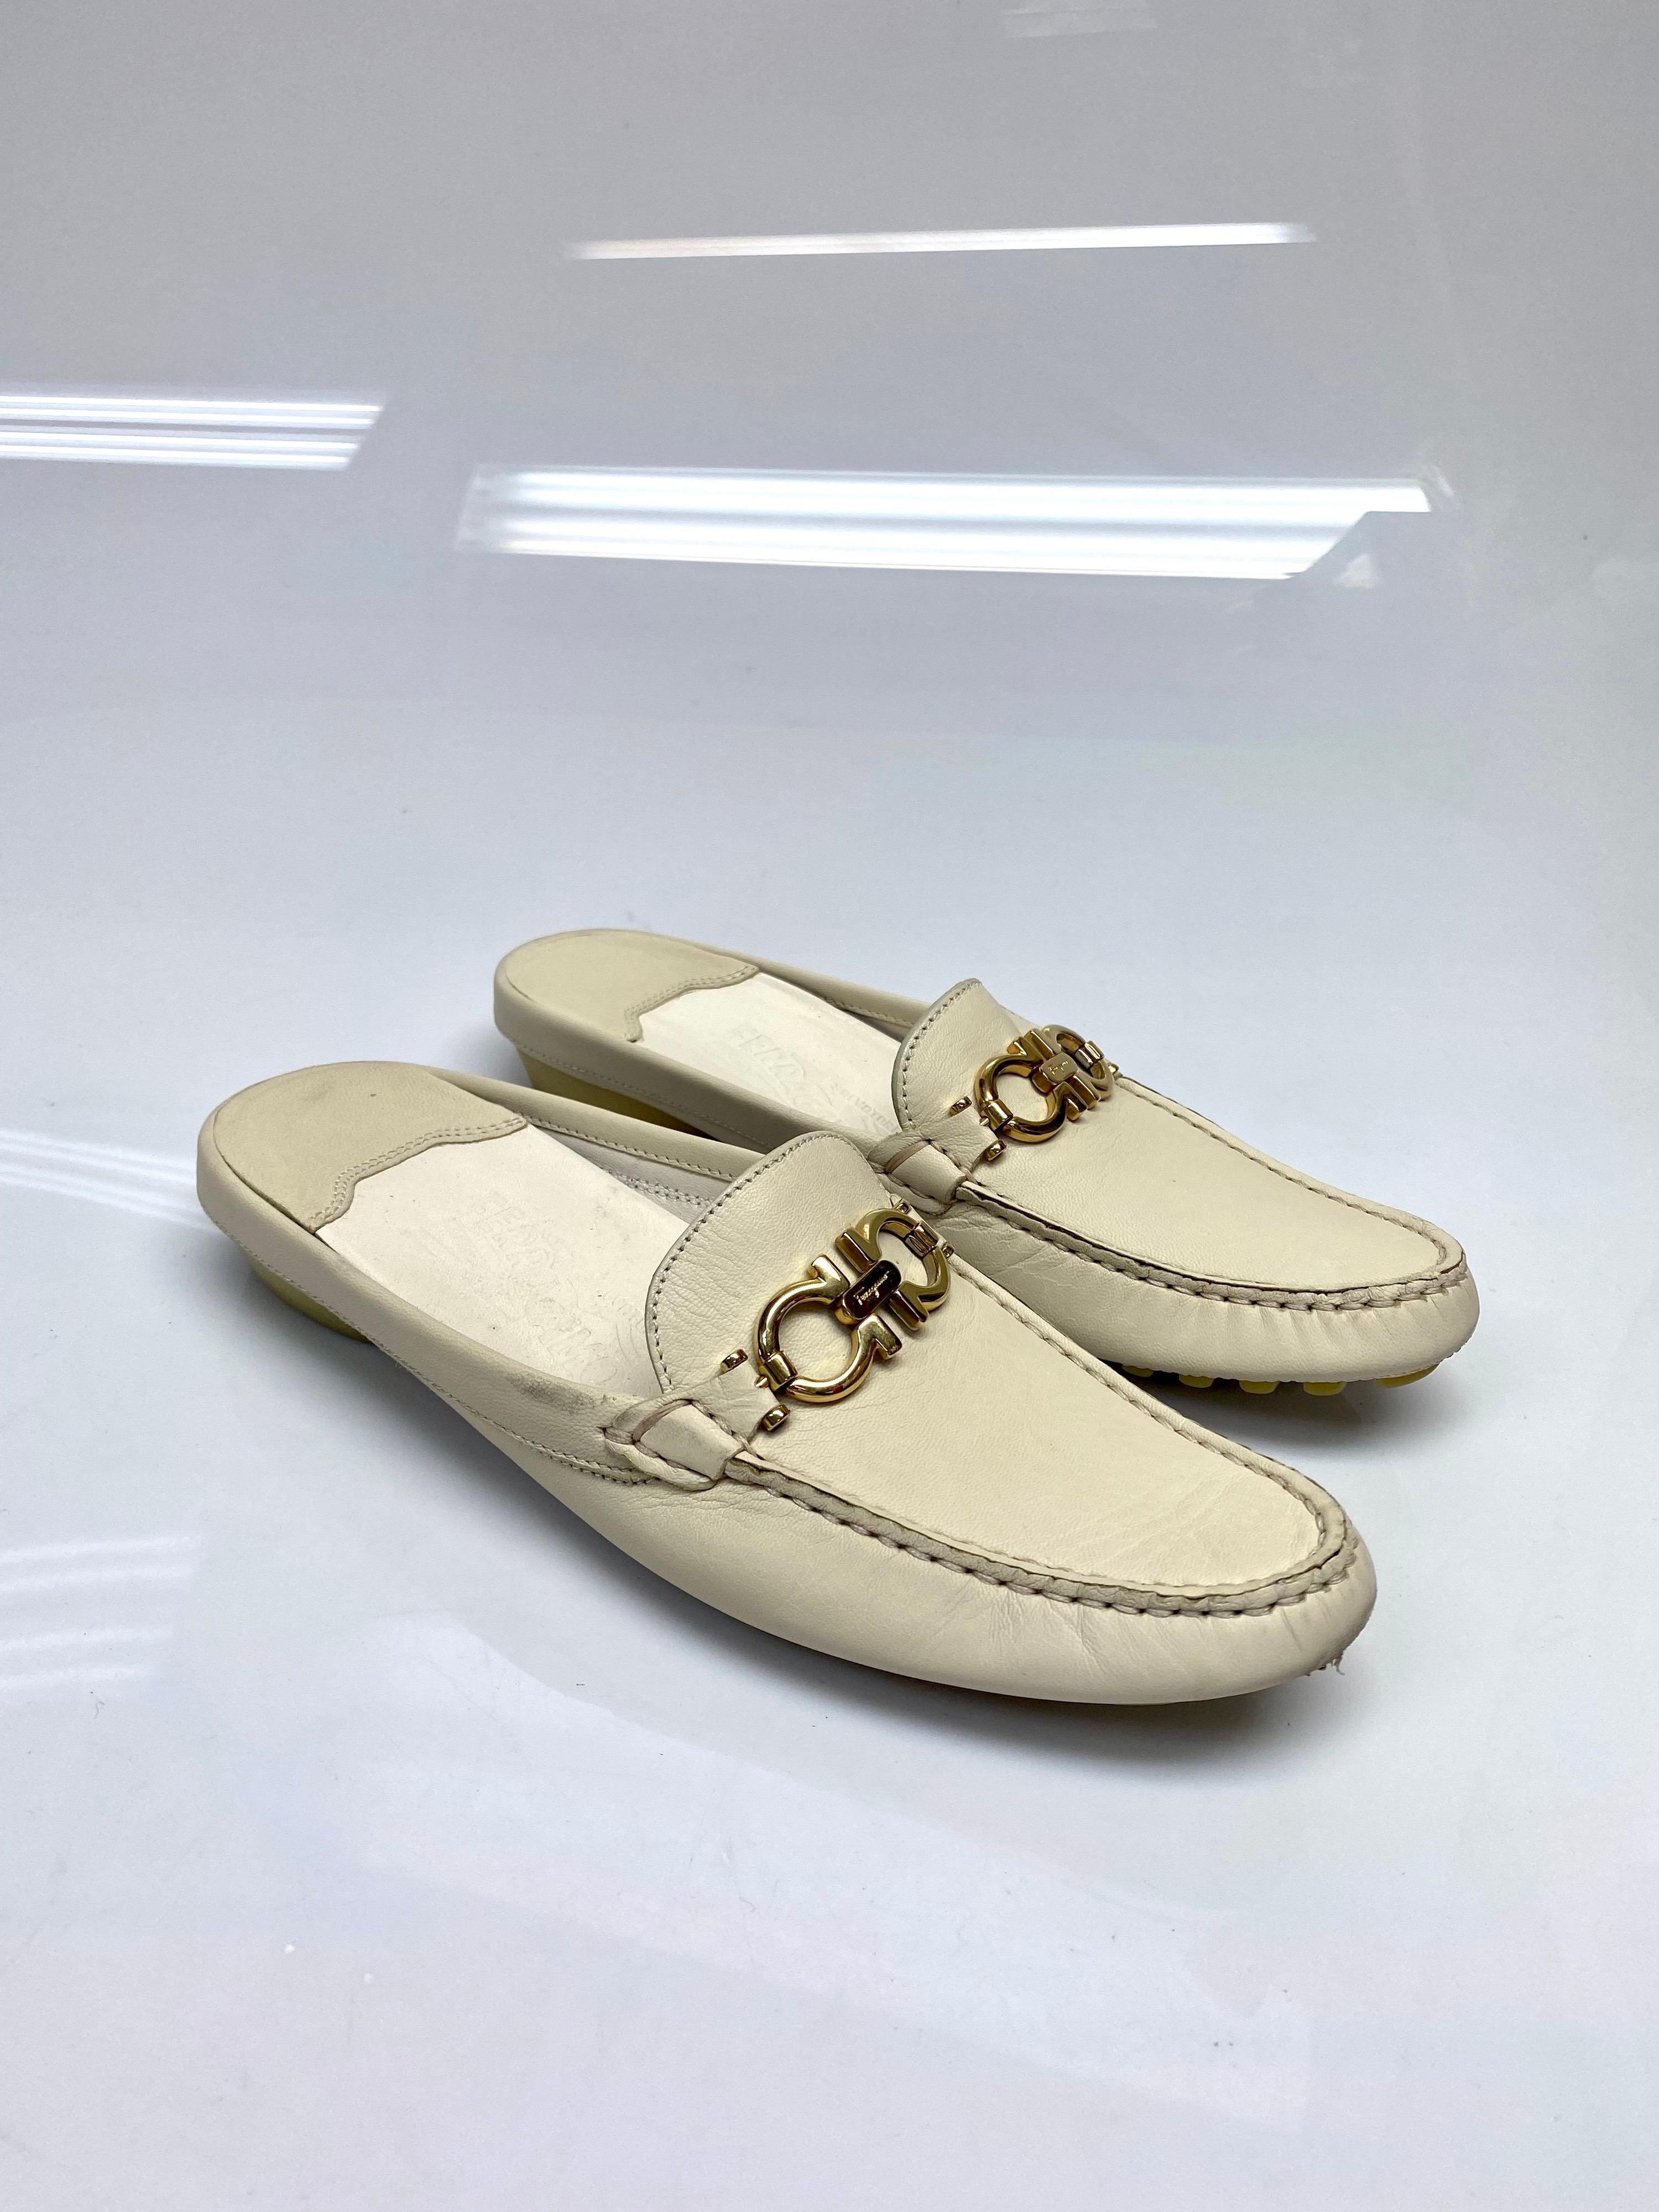 Ferragamo Ivory Leather Driving Mule Shoe Size 6.5. This shoe is made of soft calfskin leather with a slightly rounded toe, decorated with a Gancini buckle. This pair also has a padded back for extra comfort. An excellent option for relaxed style